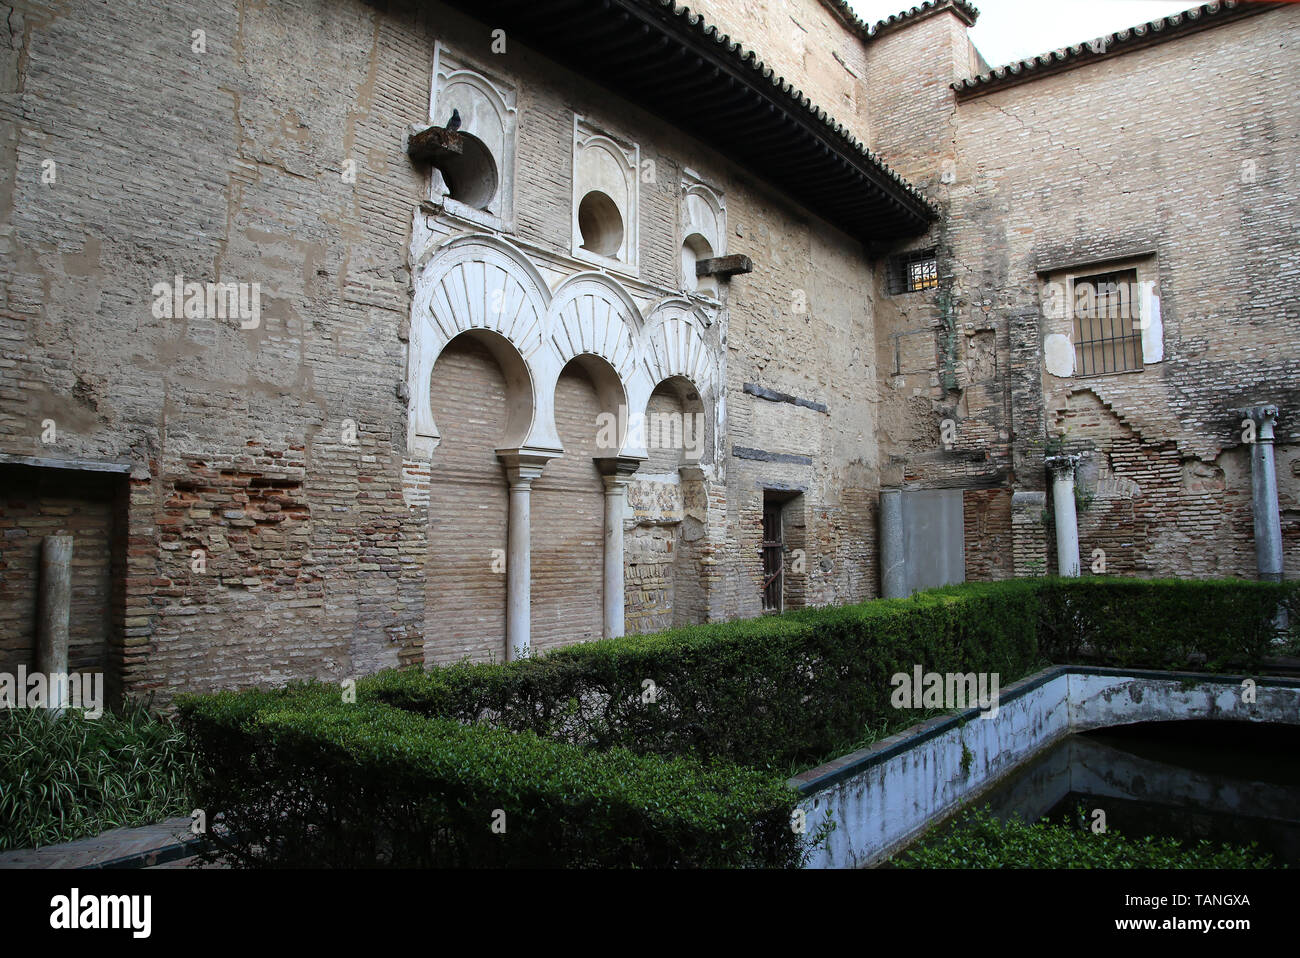 Spain. Seville. Alcazar of Seville. Patio del Yeso, 12th century. Part of old Almohad palace. North portico. Stock Photo